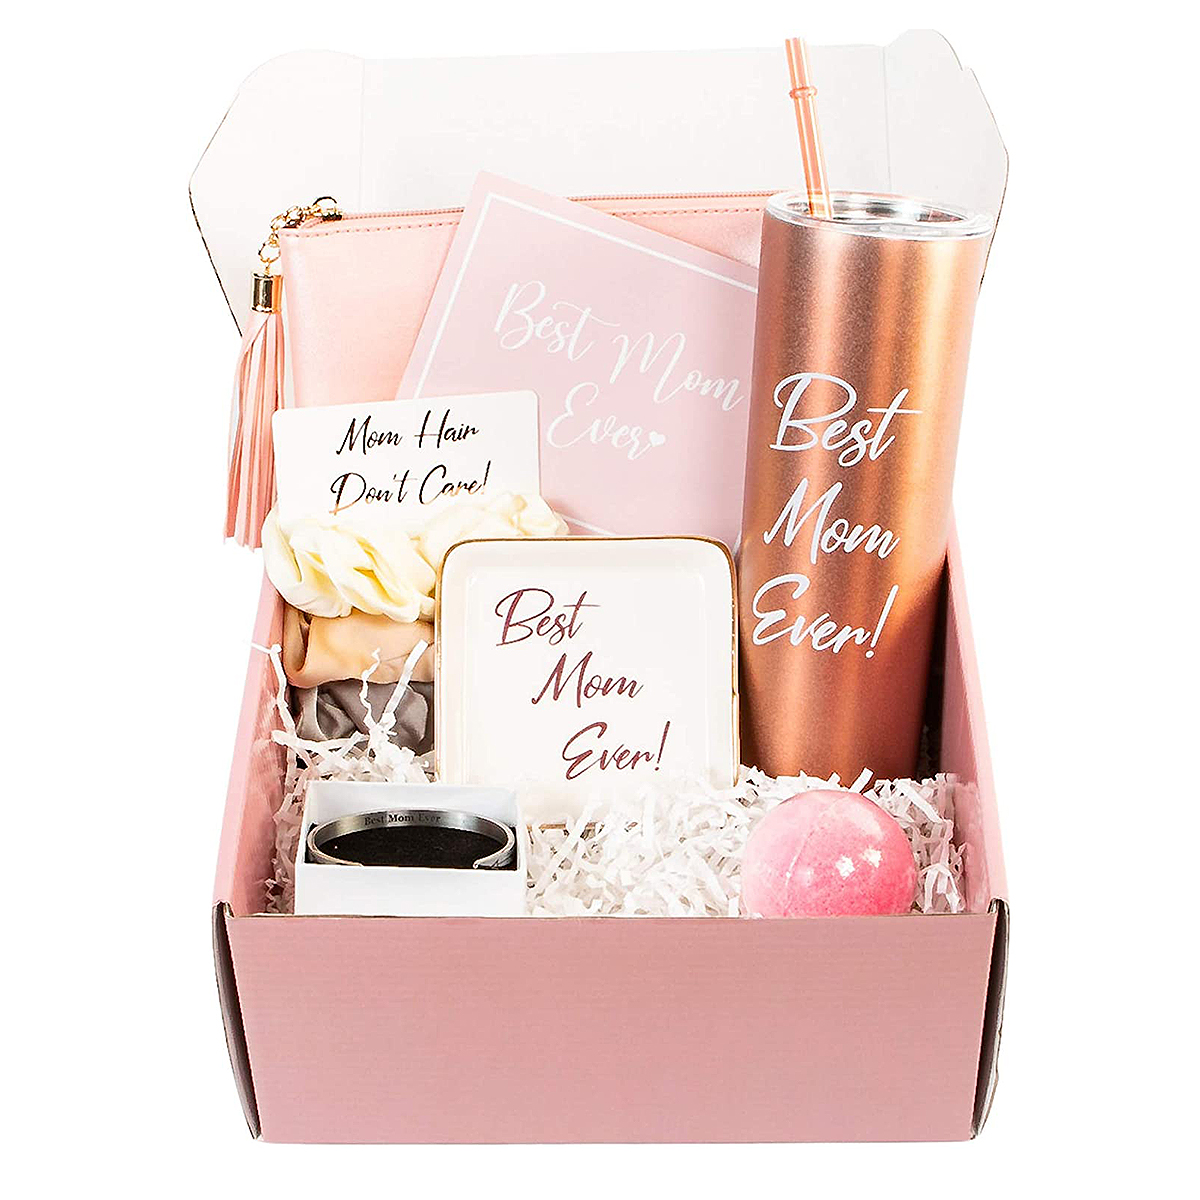 https://www.usmagazine.com/wp-content/uploads/2022/04/mothers-day-gift-best-mom-ever-box.jpg?quality=82&strip=all